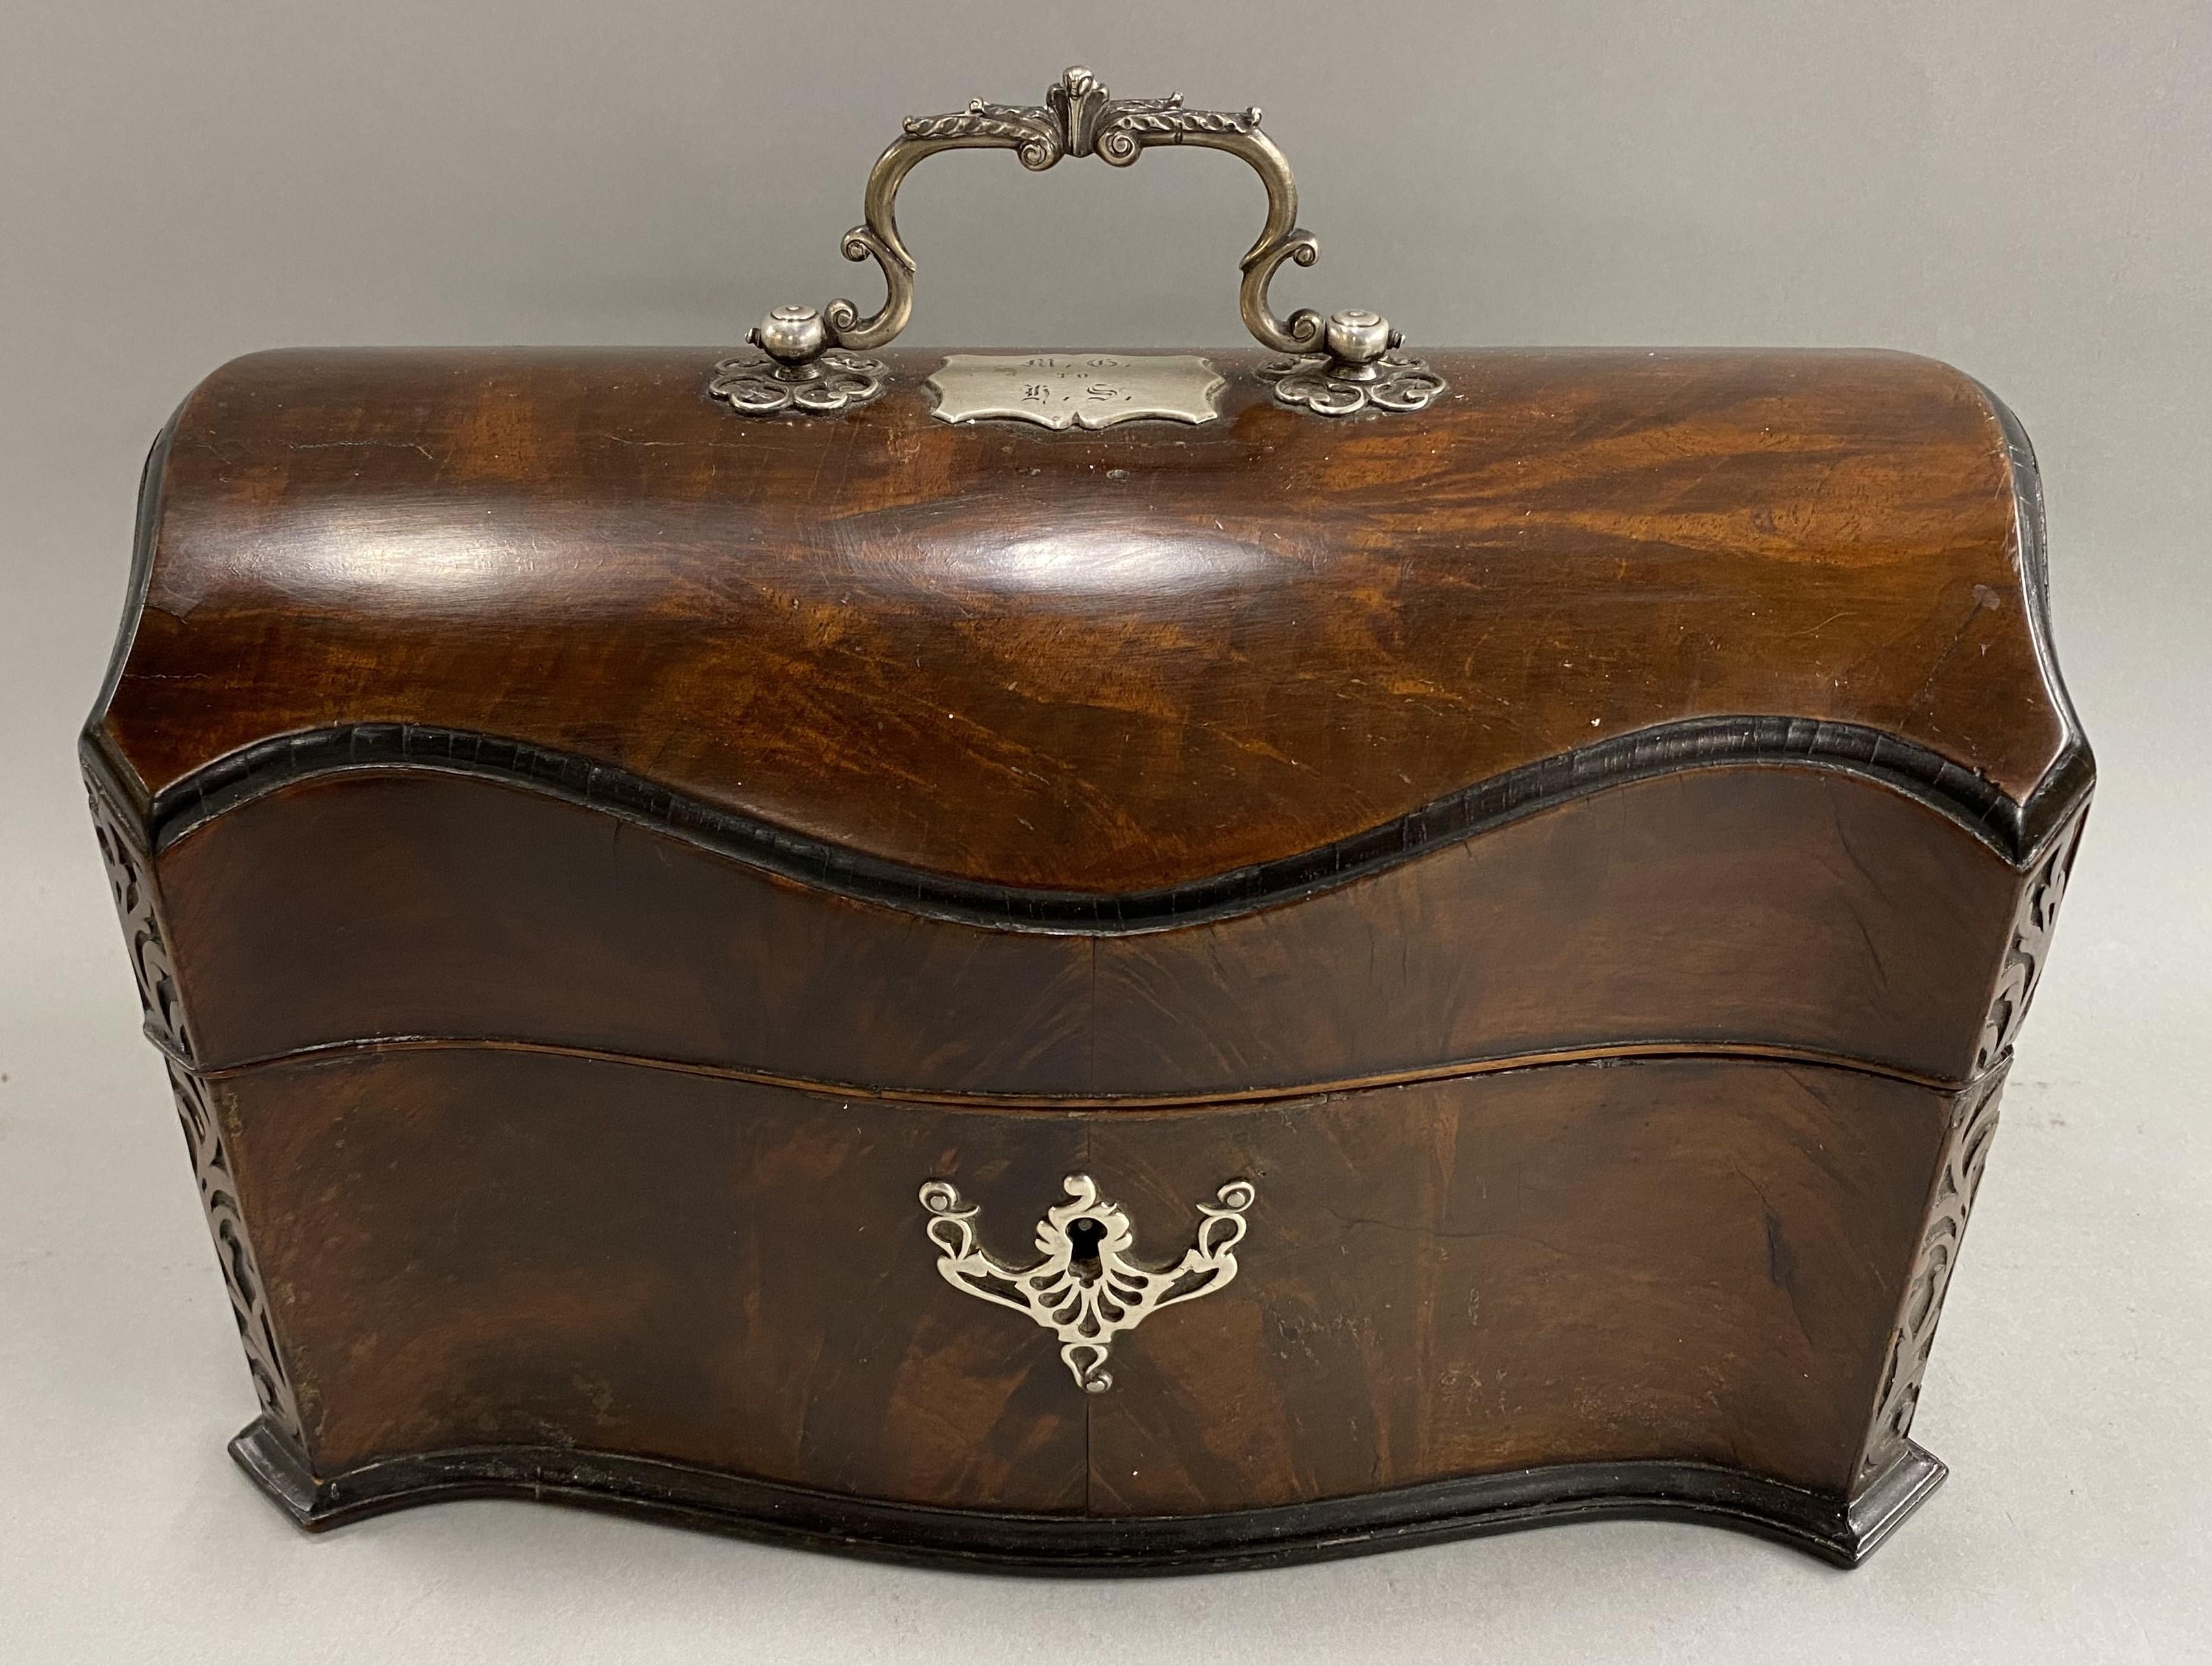 A nicely carved English mahogany tea caddy in the Chippendale style with dome top and scroll carved corners, silver plate scrollwork escutcheon & handle, the custom interior lined with velour for silver plated tea boxes with acorn & oak leaf knops